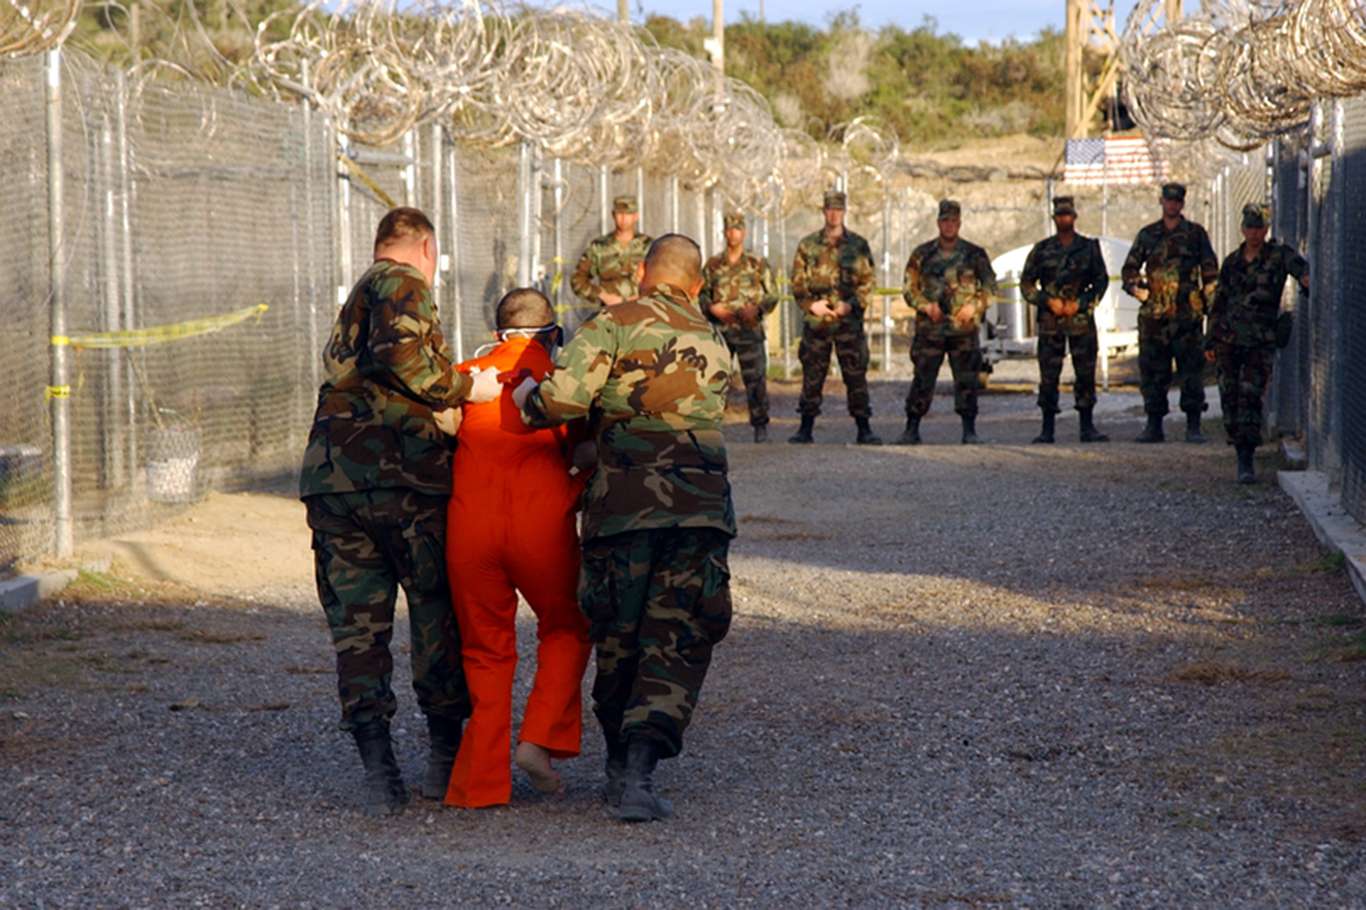 Another prisoner released from Guantanamo, the US torture base